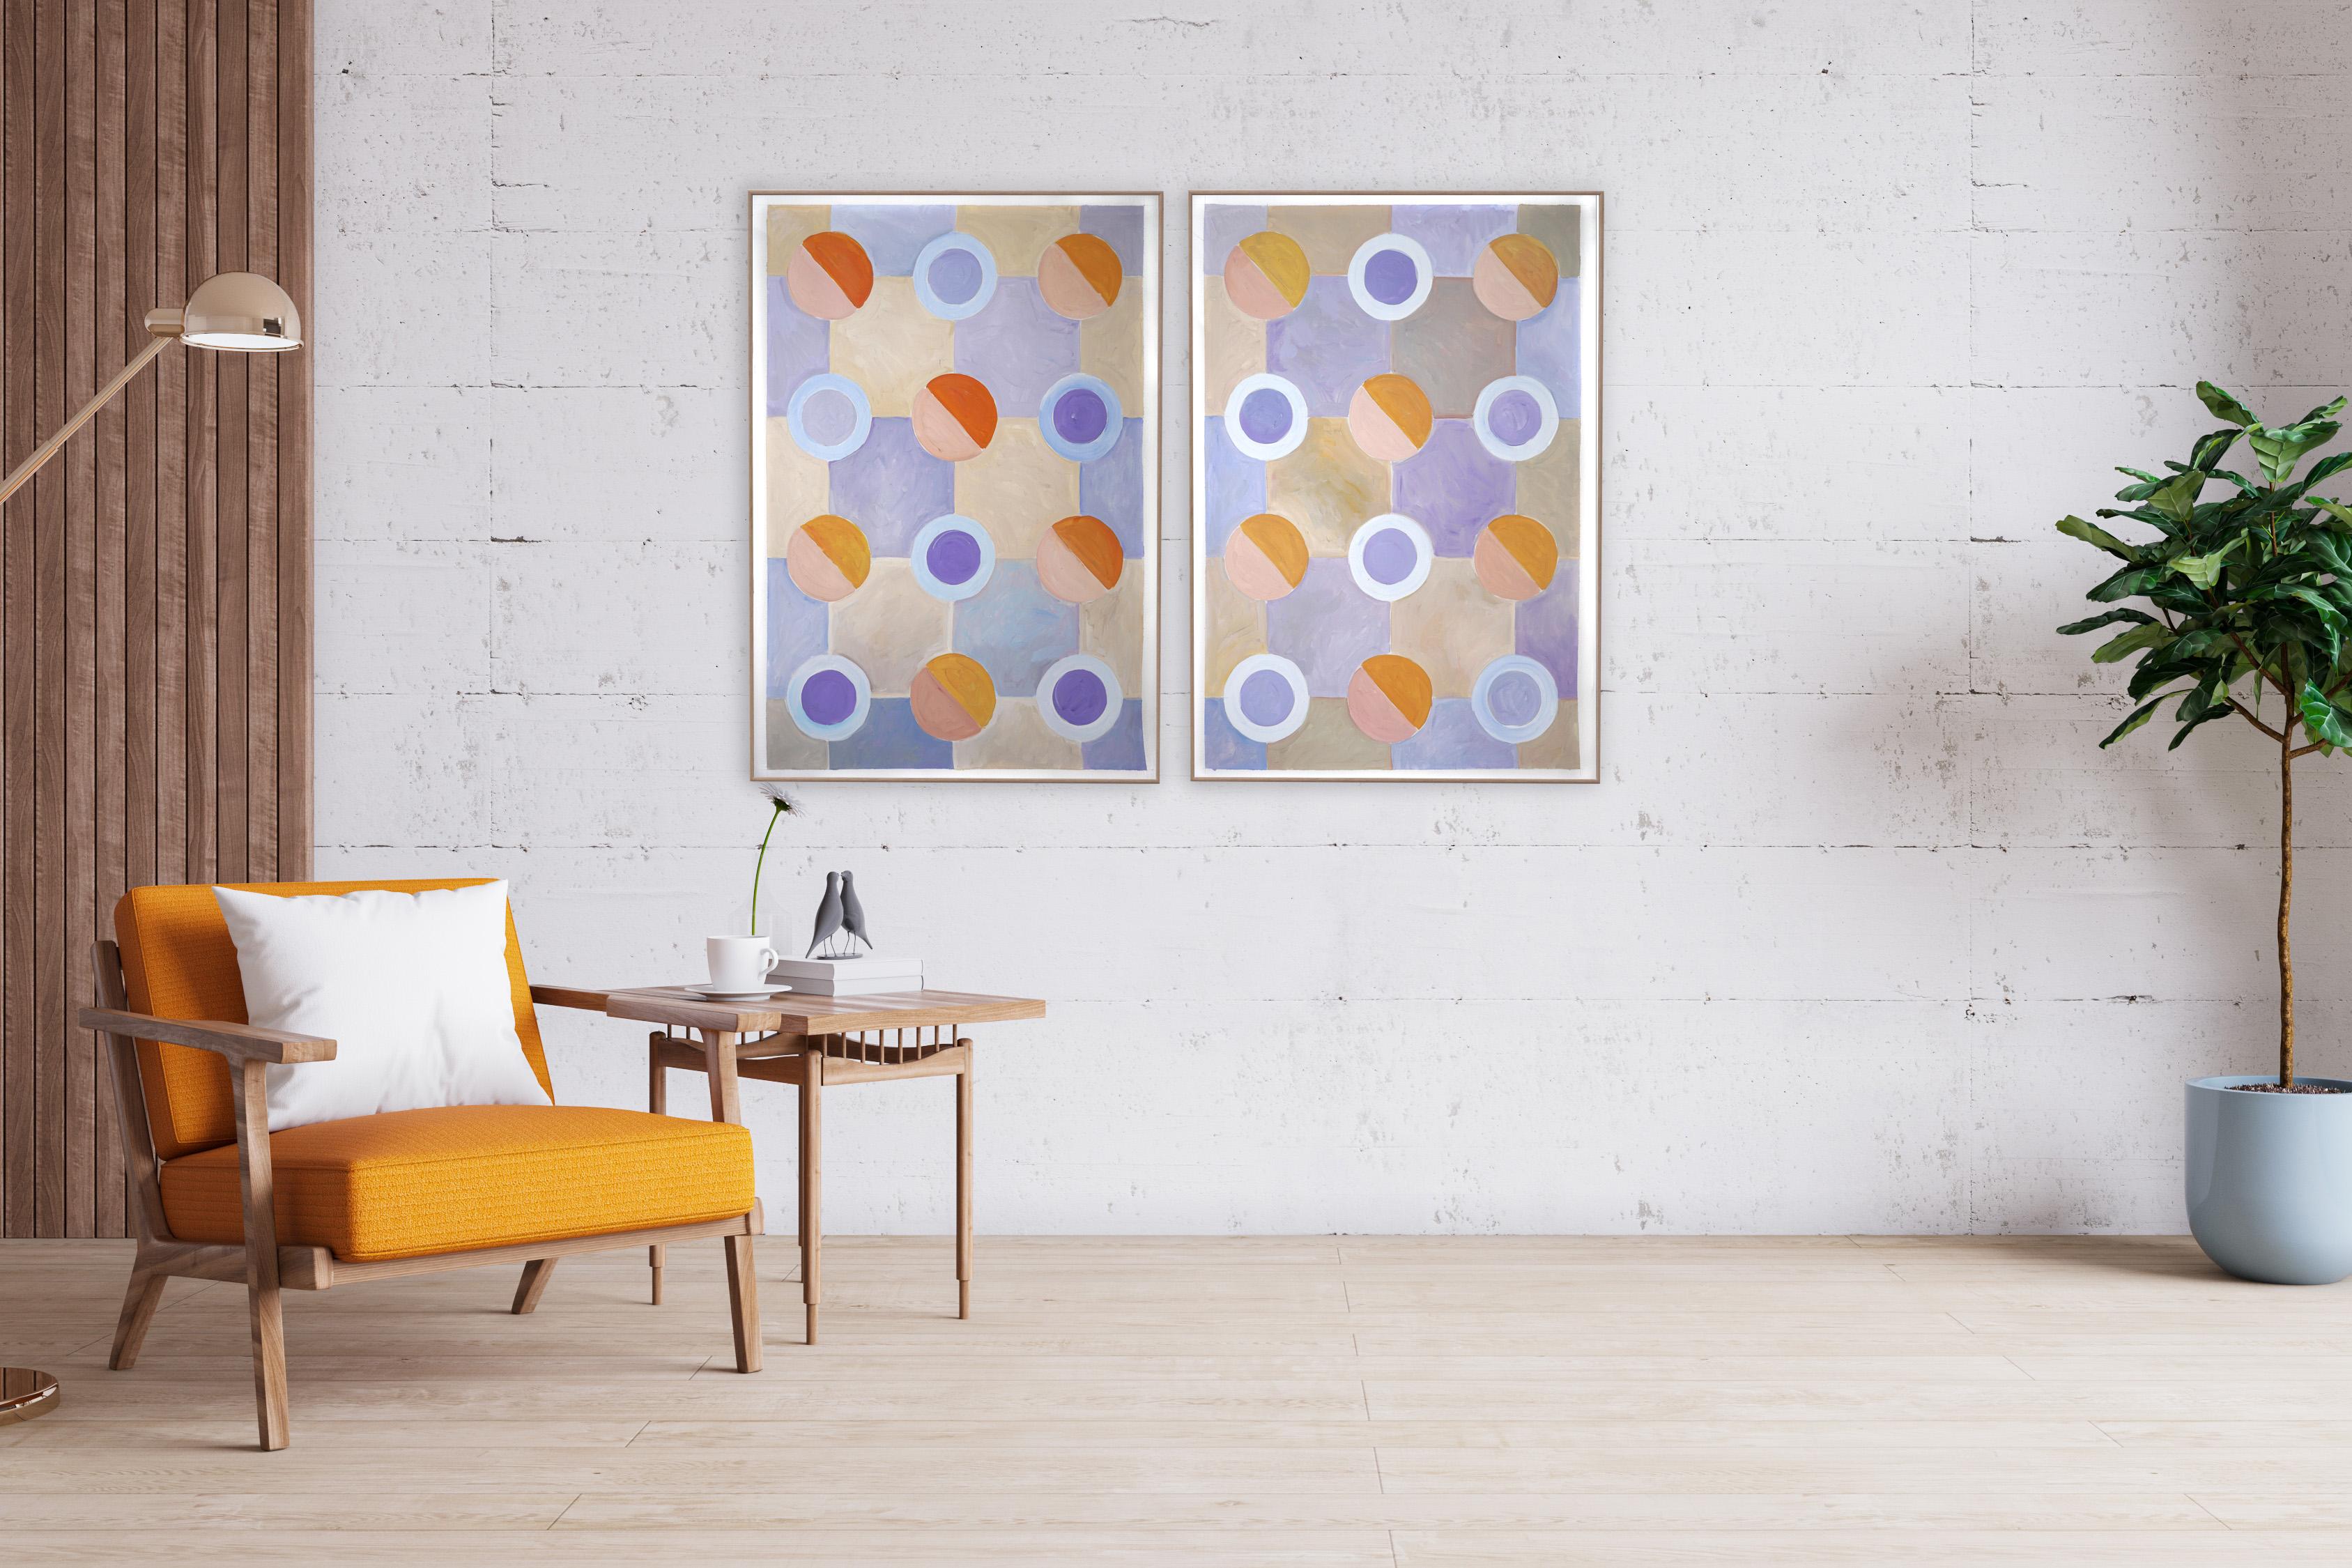 Large Diptych, Pastel Tones of Cool Futurist Checkered Pattern, Orange, Violet  - Painting by Natalia Roman